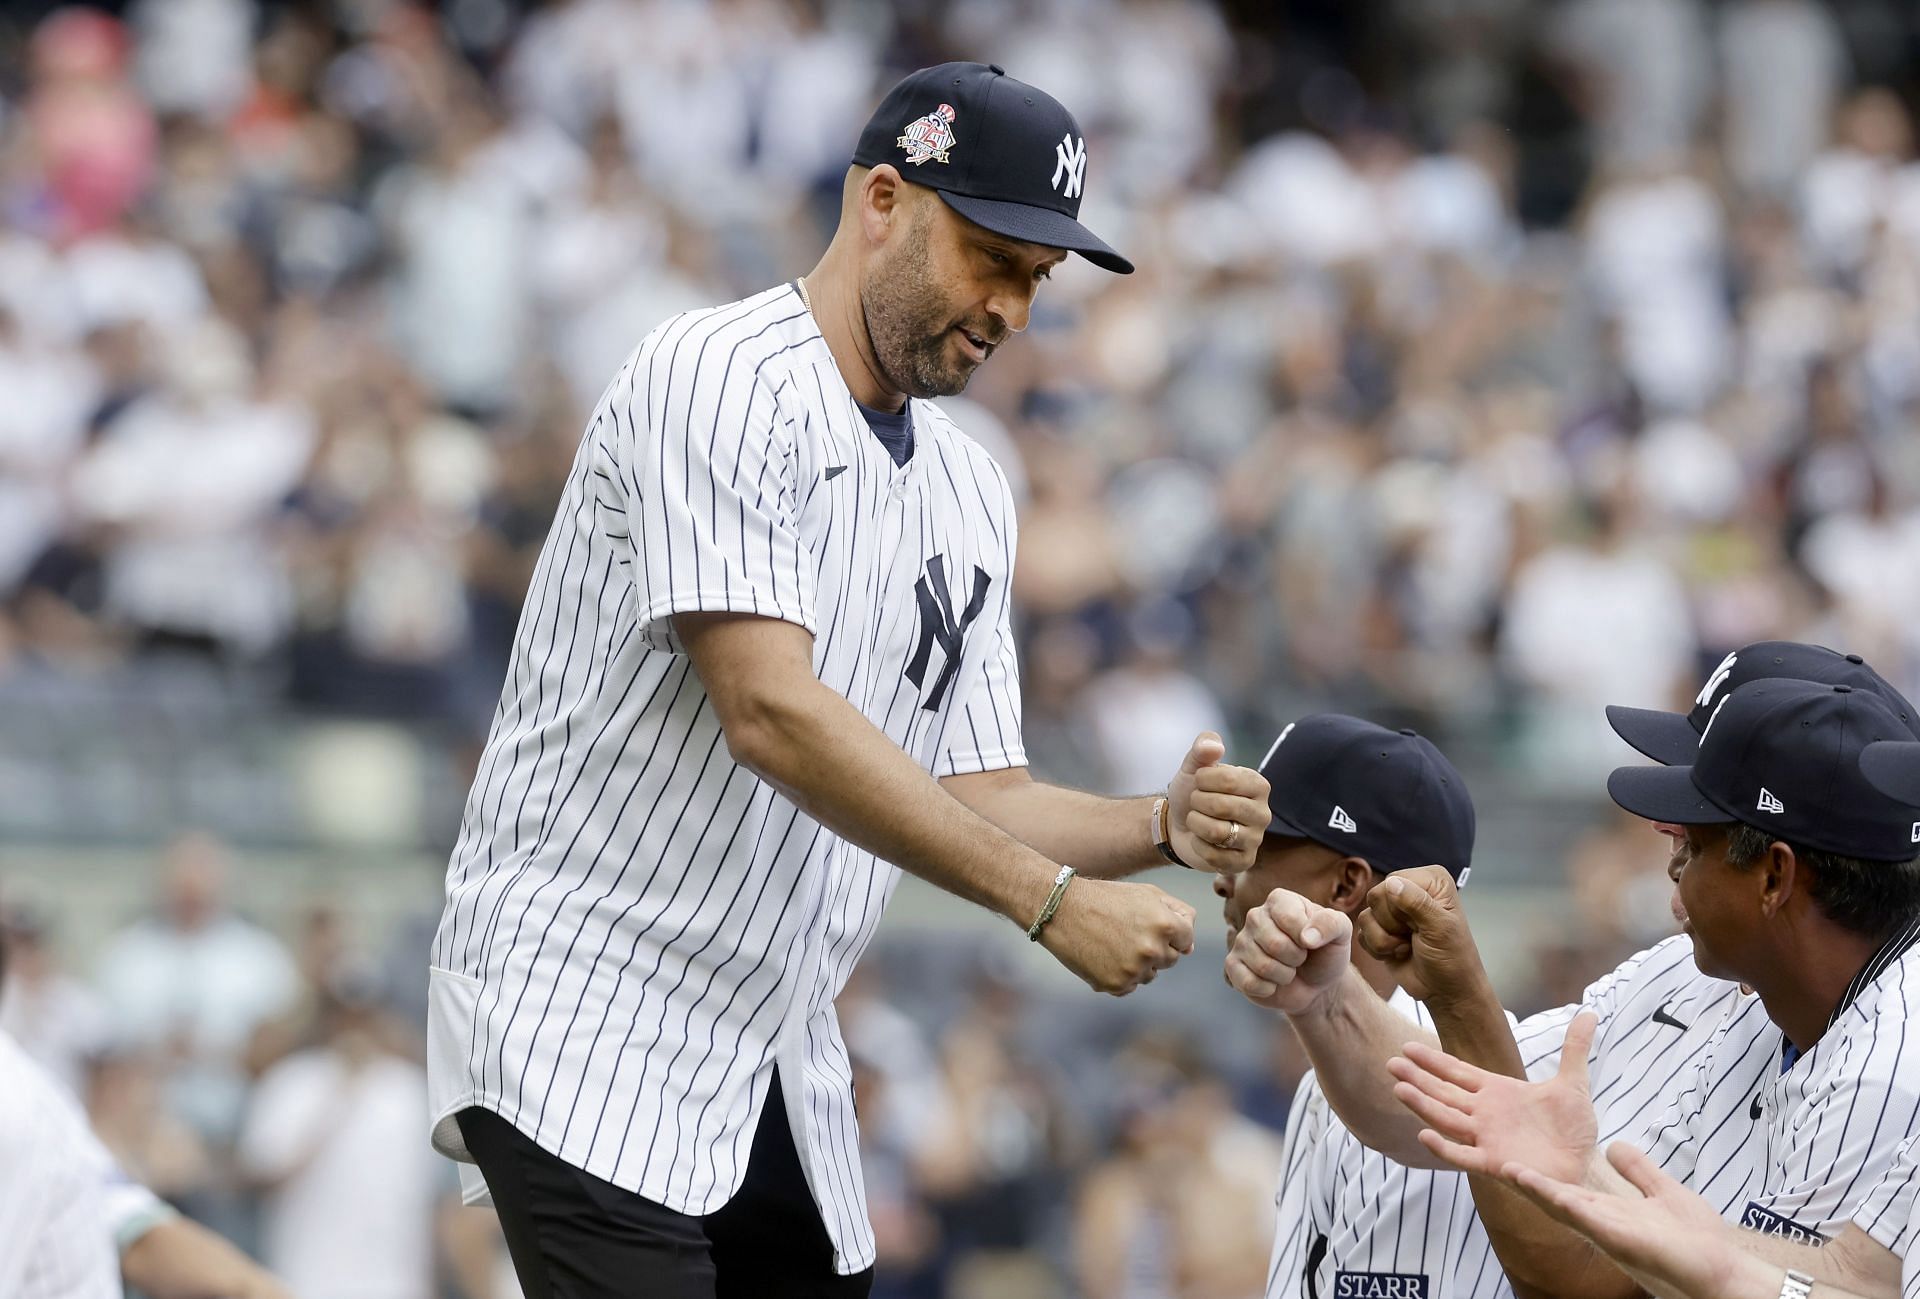 New York Yankees legend, Derek Jeter has listed his house up for auction with a strarting price of $6.5 million. Via Clutch Points. Via Clutch Points Via Clutch Points. Via Clutch Points As any professional athlete, Derek Jeter&rsquo;s house feature a full built gym - Via Clutch Points. Via Clutch Points